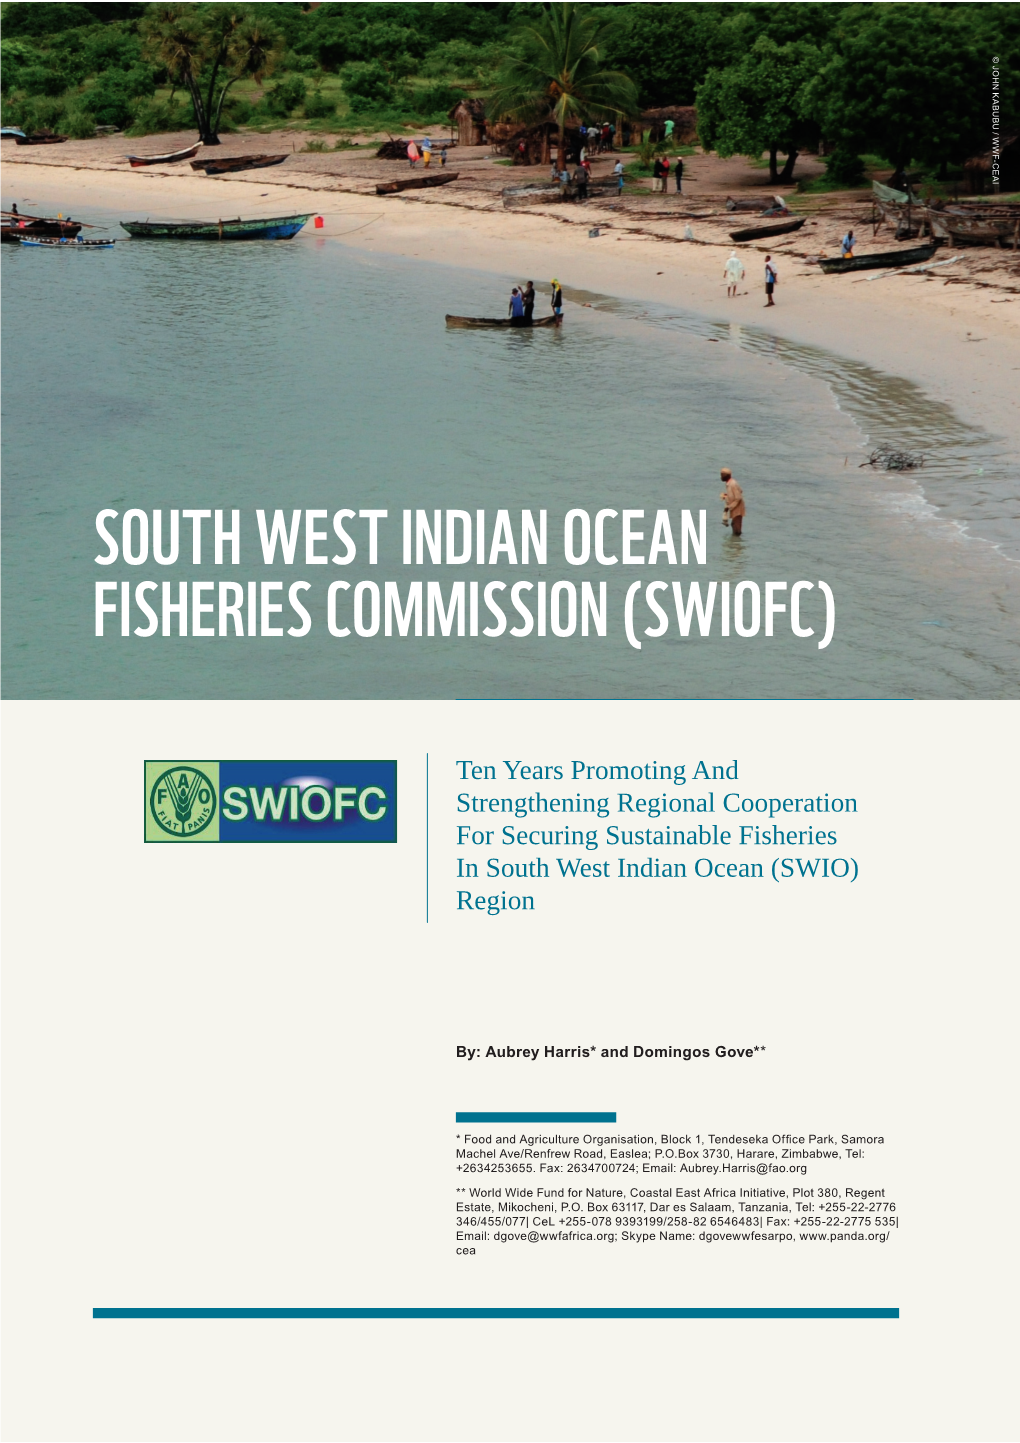 South West Indian Ocean Fisheries Commission (Swiofc)